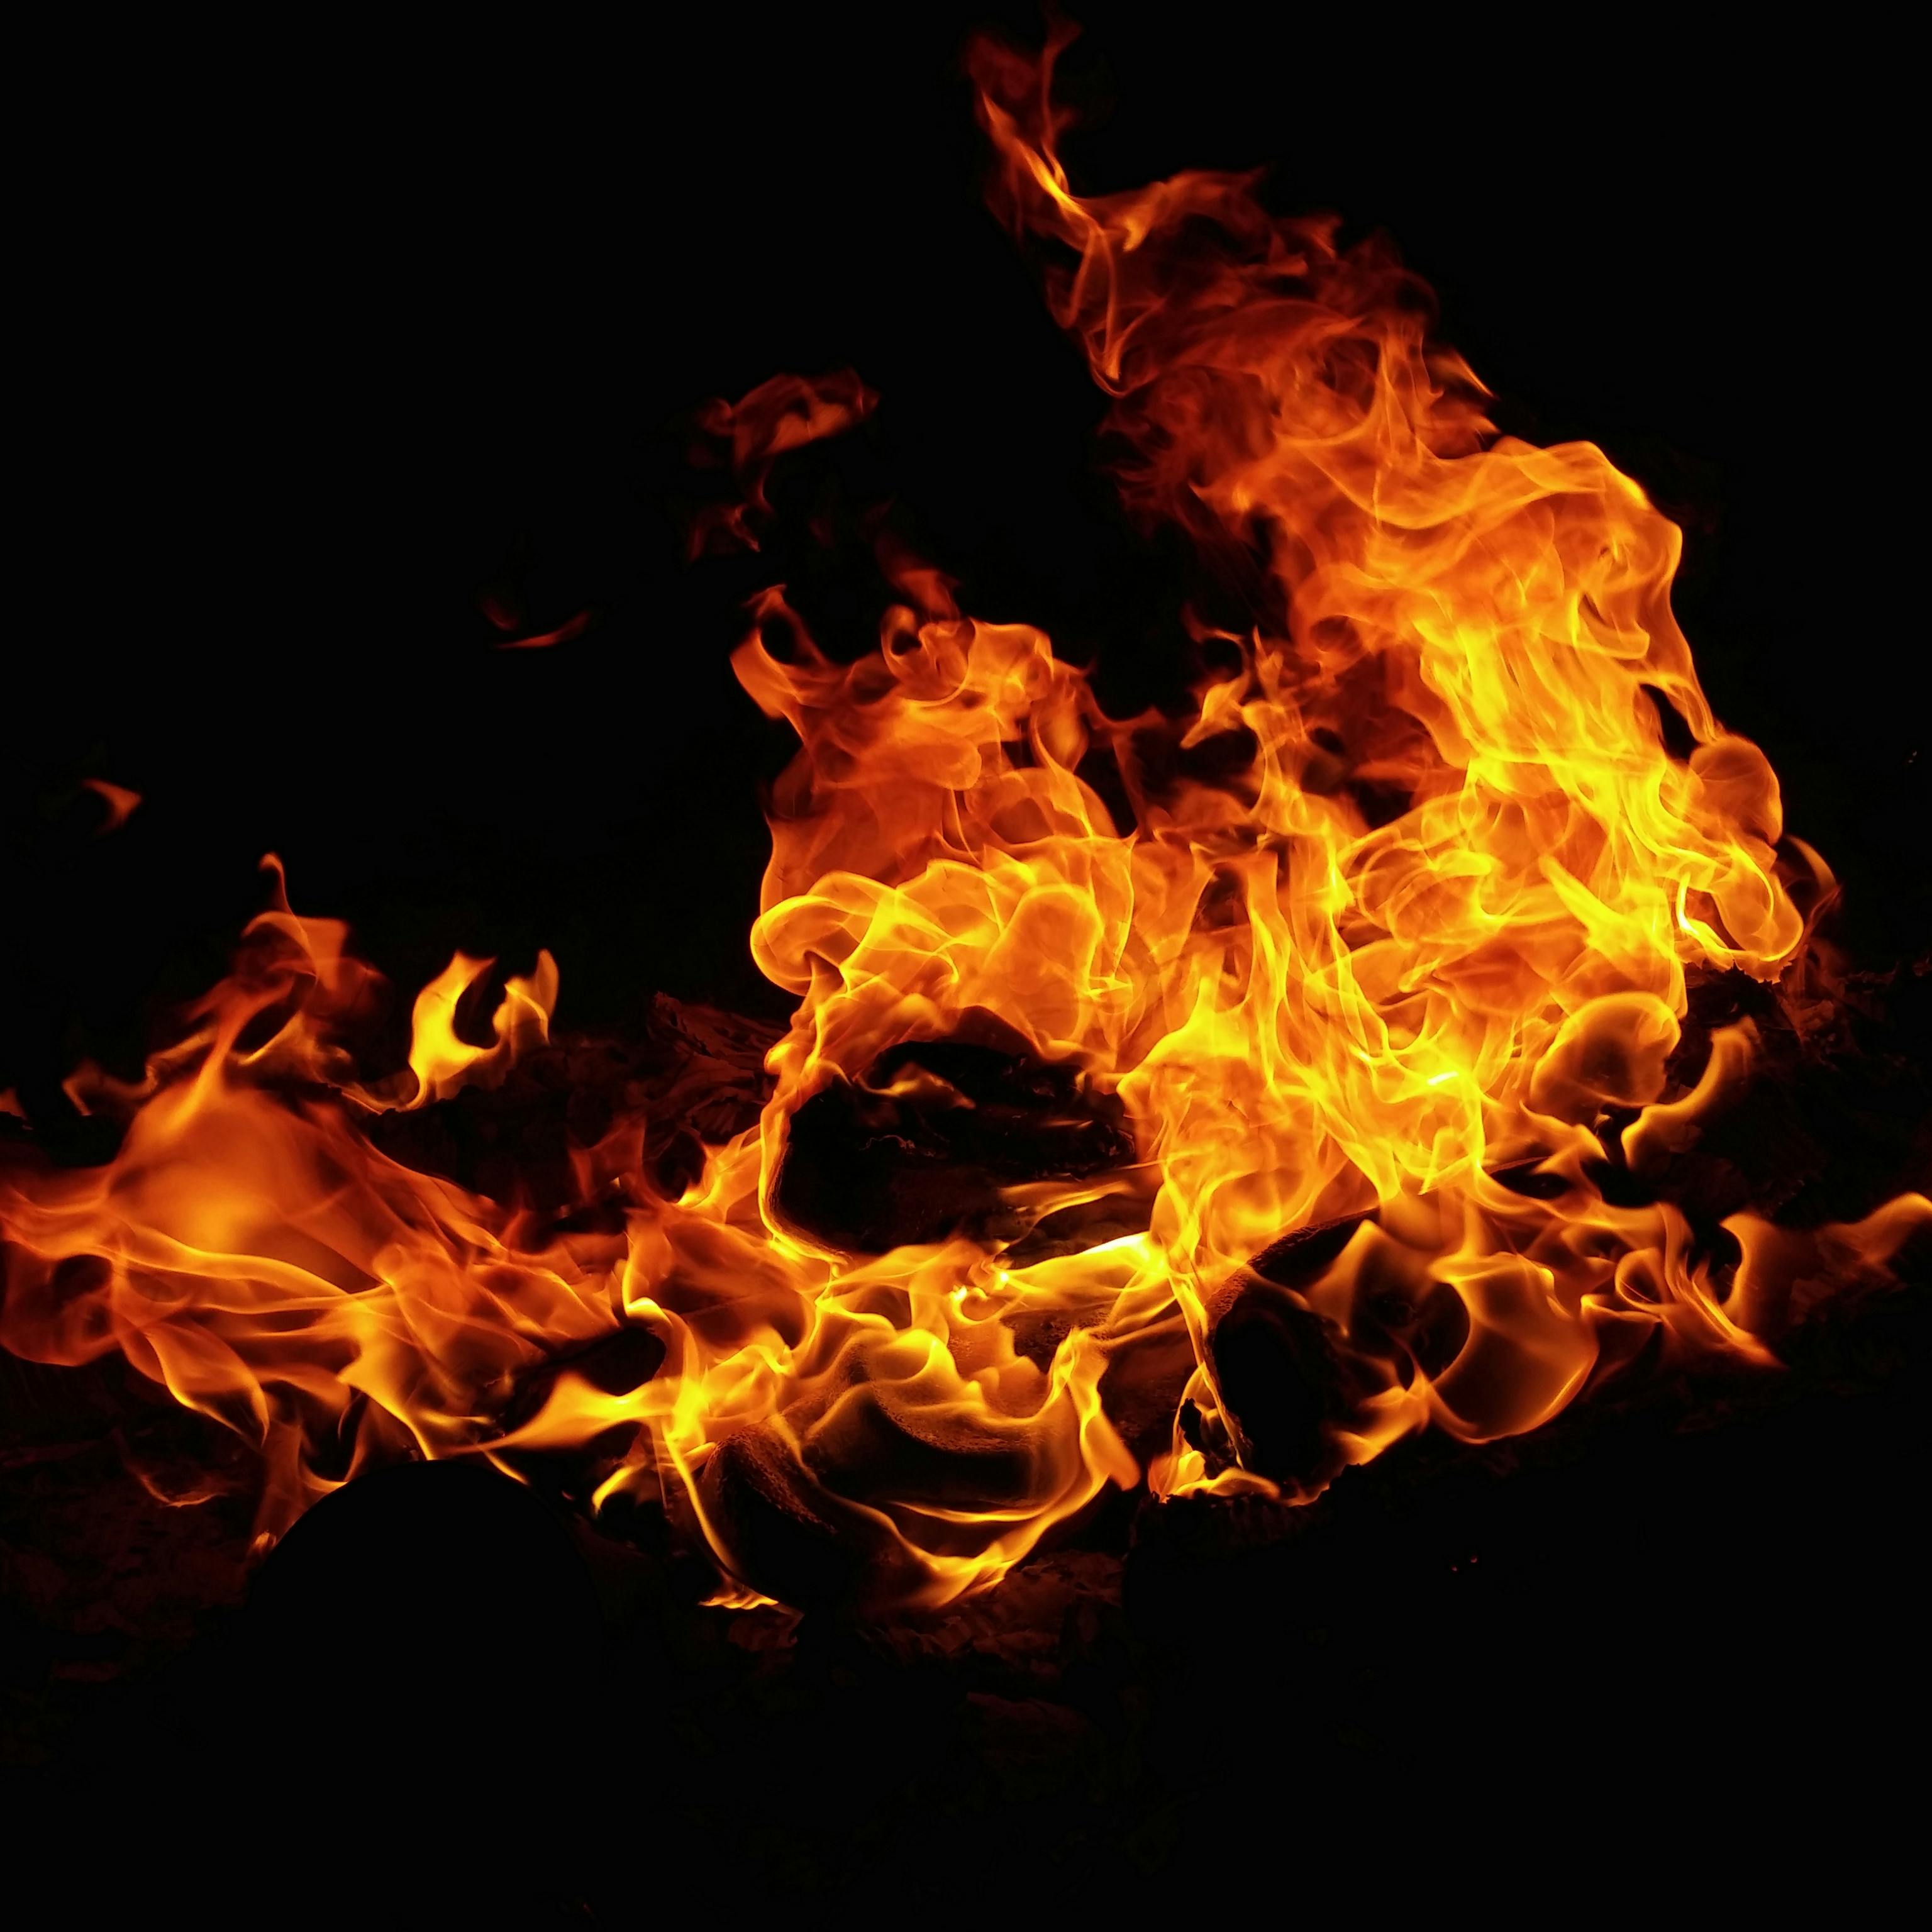 Photograph of a Burning Fire · Free Stock Photo